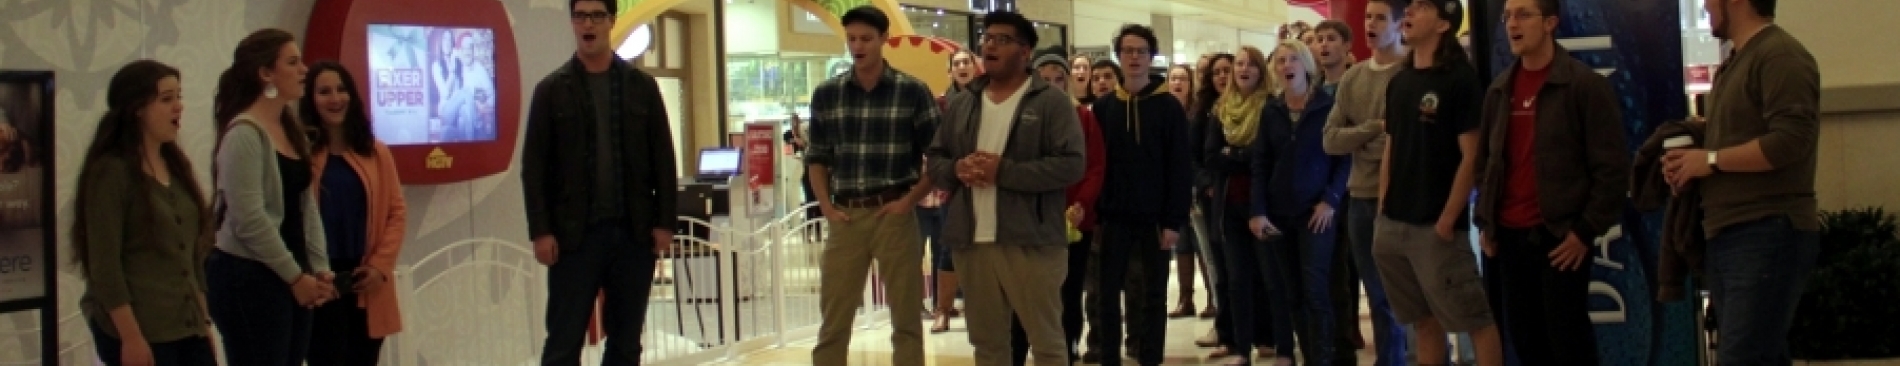 Video: The Fifth Annual TAC “Christmas Flash Mob”